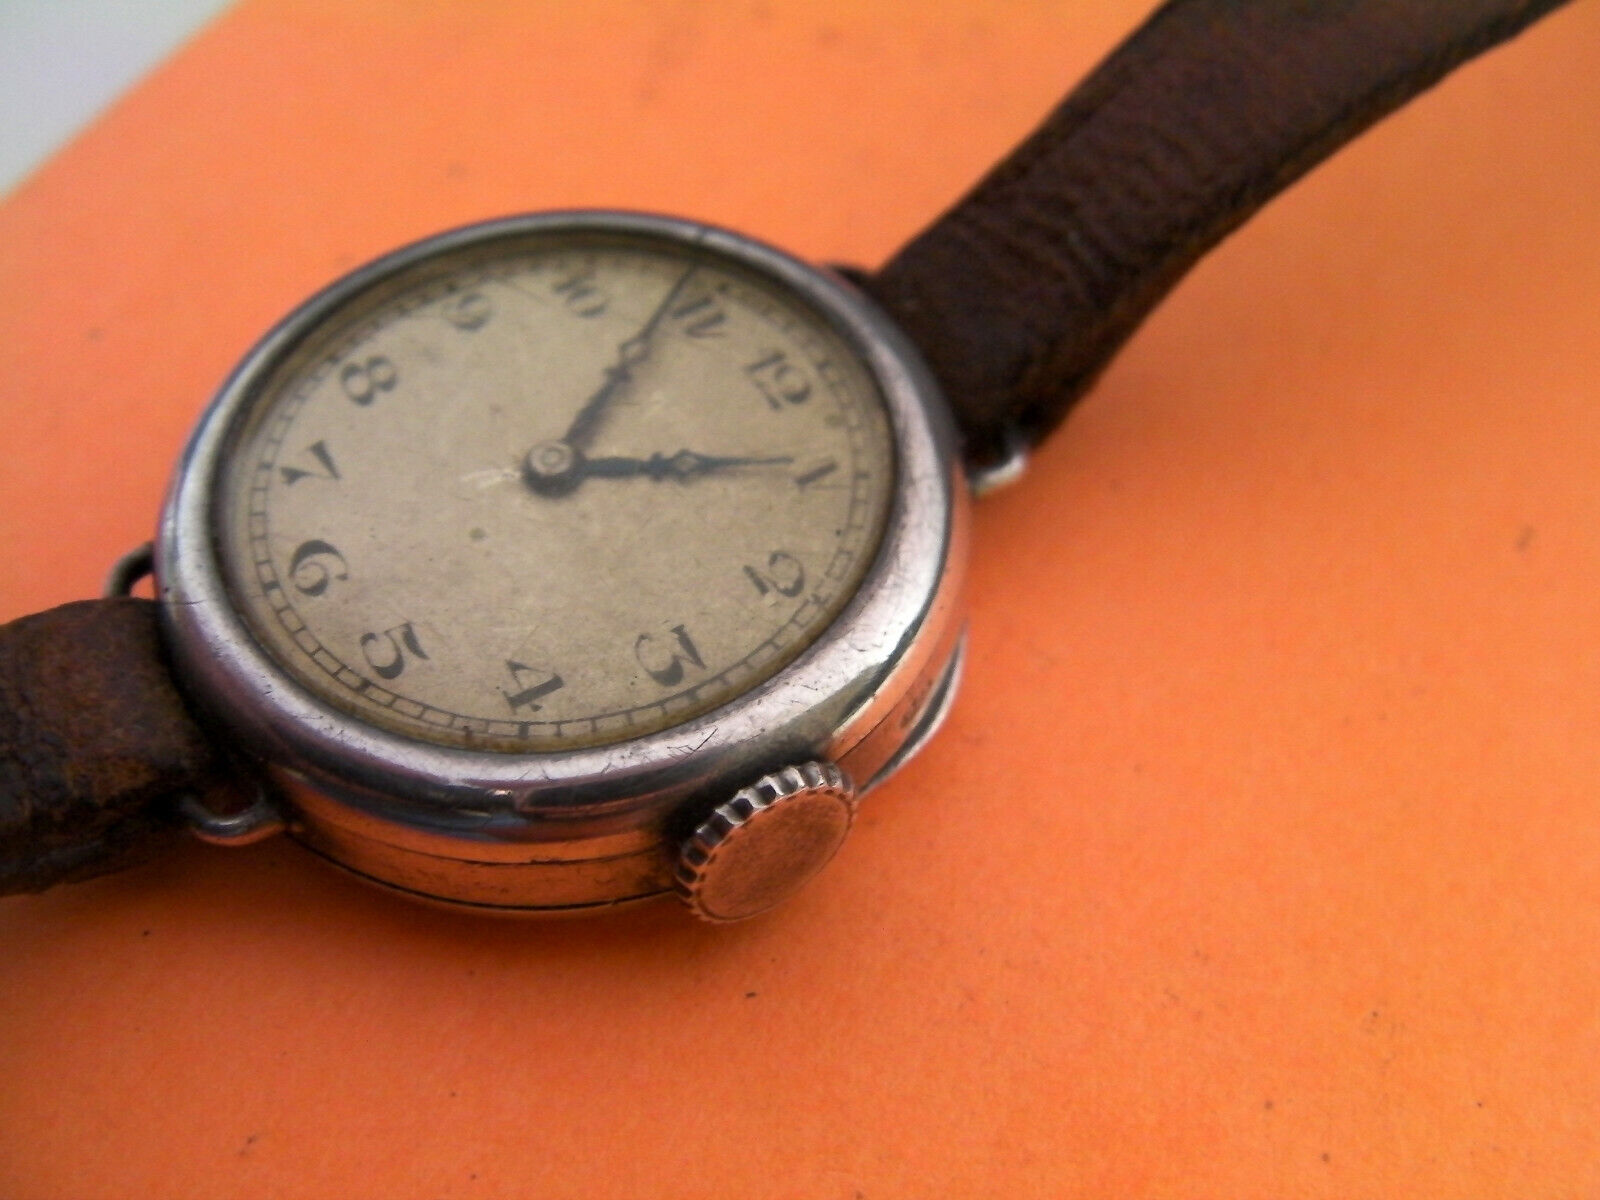 Antique 1924 Silver Wristwatch with 25mm Case - Spares or Repair - Marvin 400N